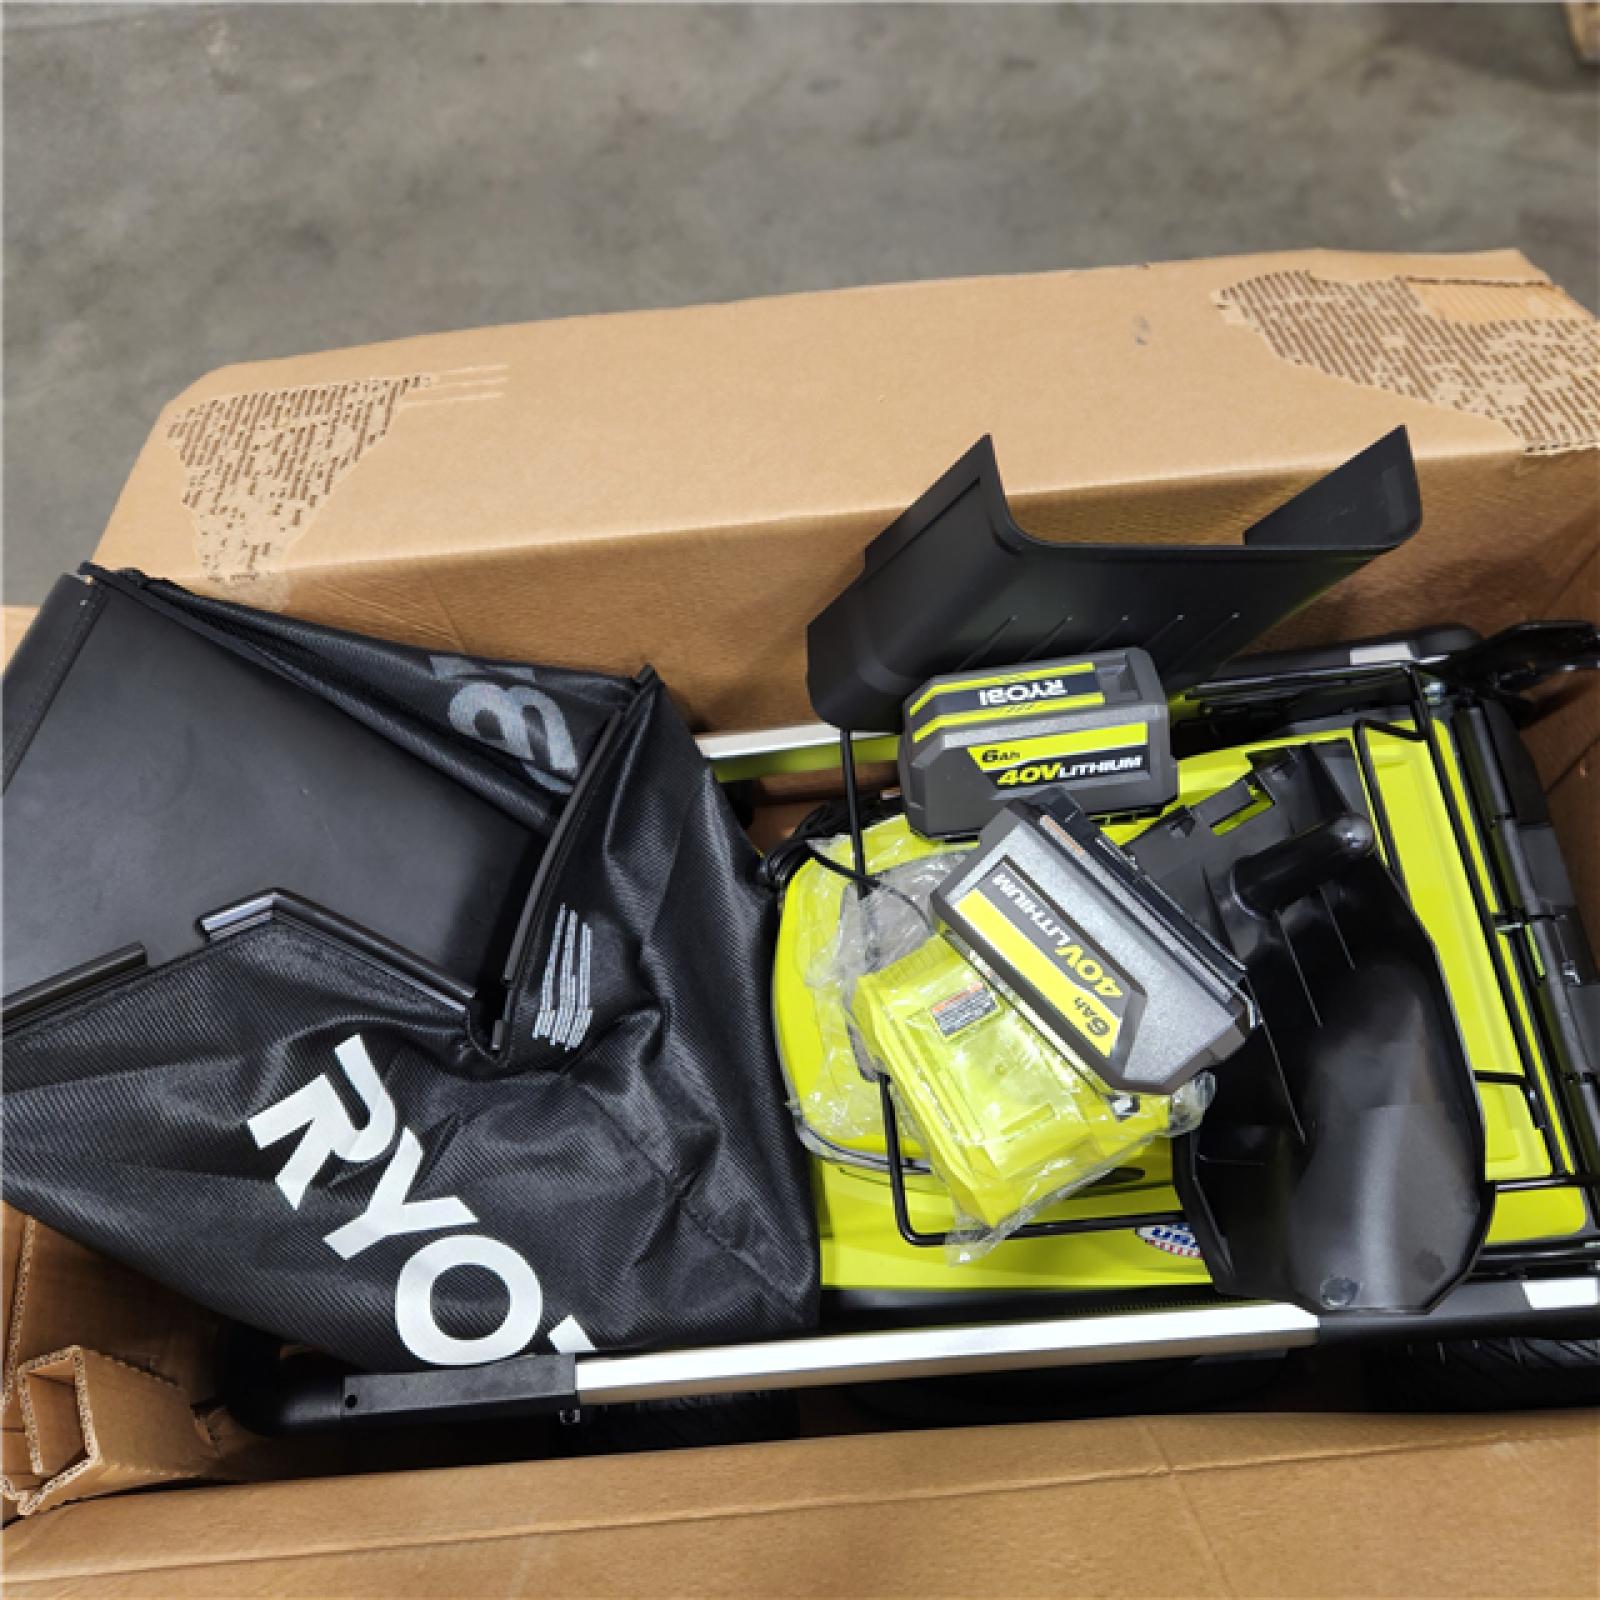 Dallas Location - As-Is RYOBI 40V HP 21 in.  Self-Propelled Lawn Mower with (2) 6.0 Ah Batteries and Charger-Appears Like New Condition